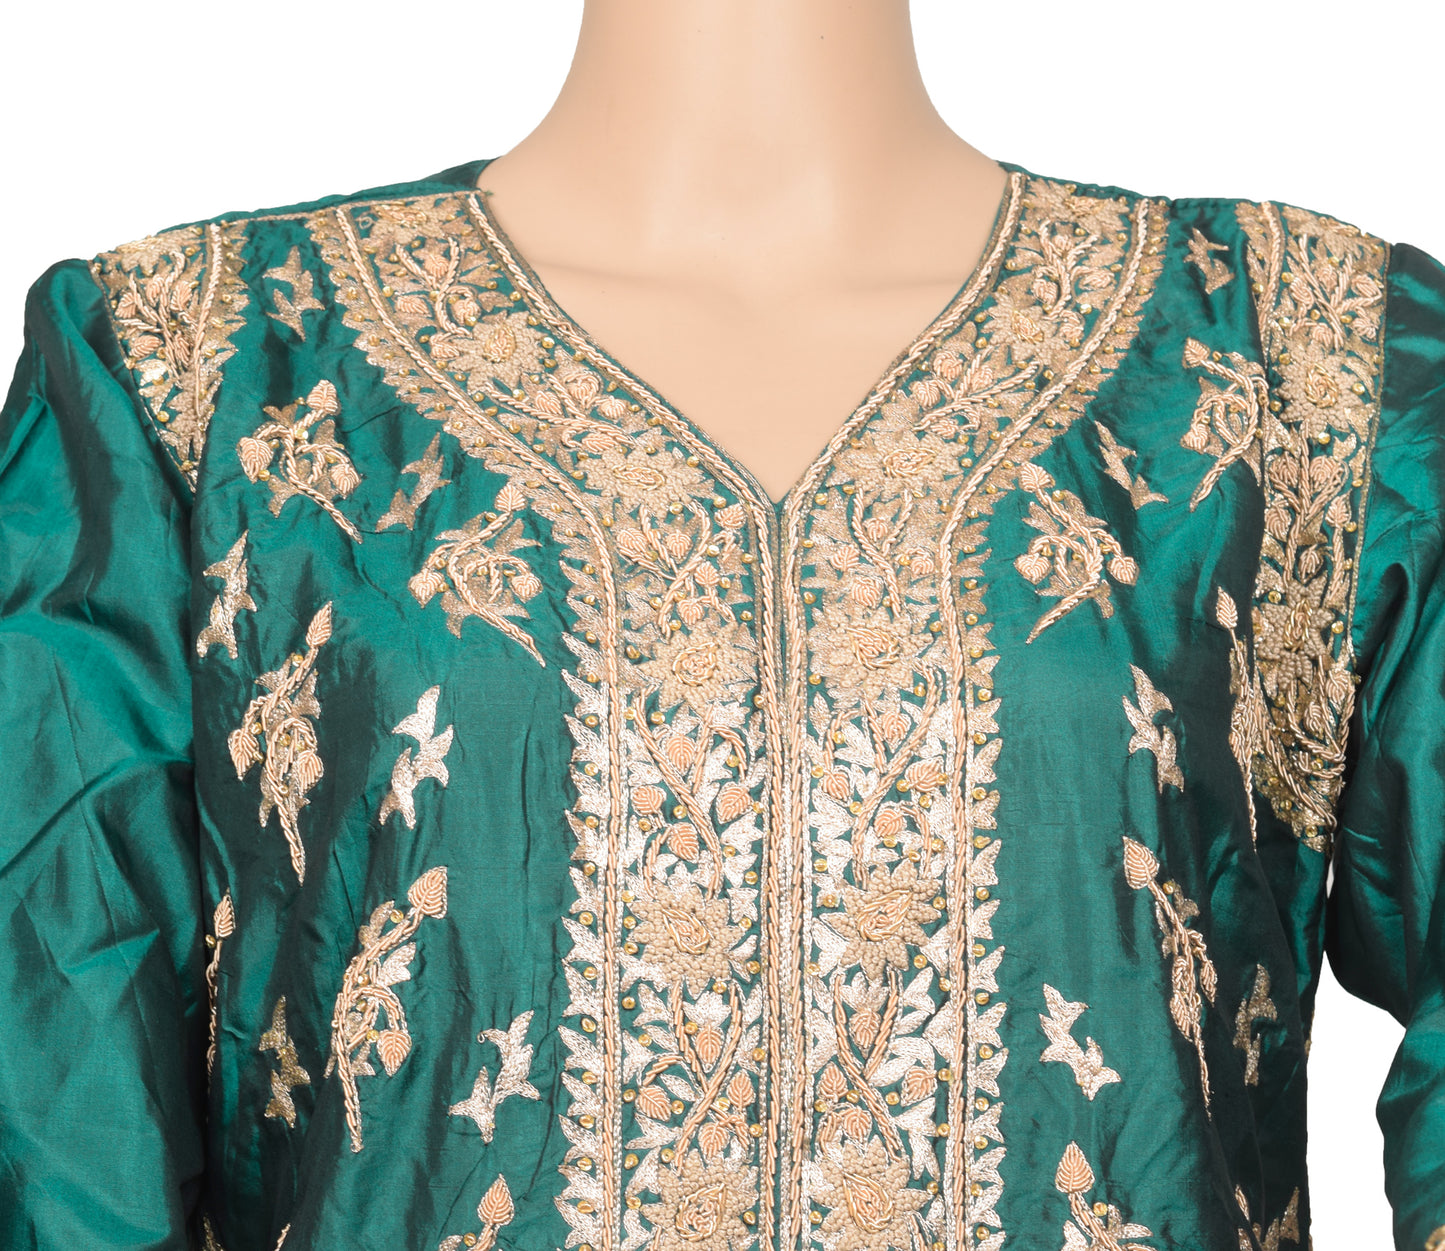 Bottle Green Short Kurti Stitched Sari Blouse Pure Silk Hand Beaded Floral Top